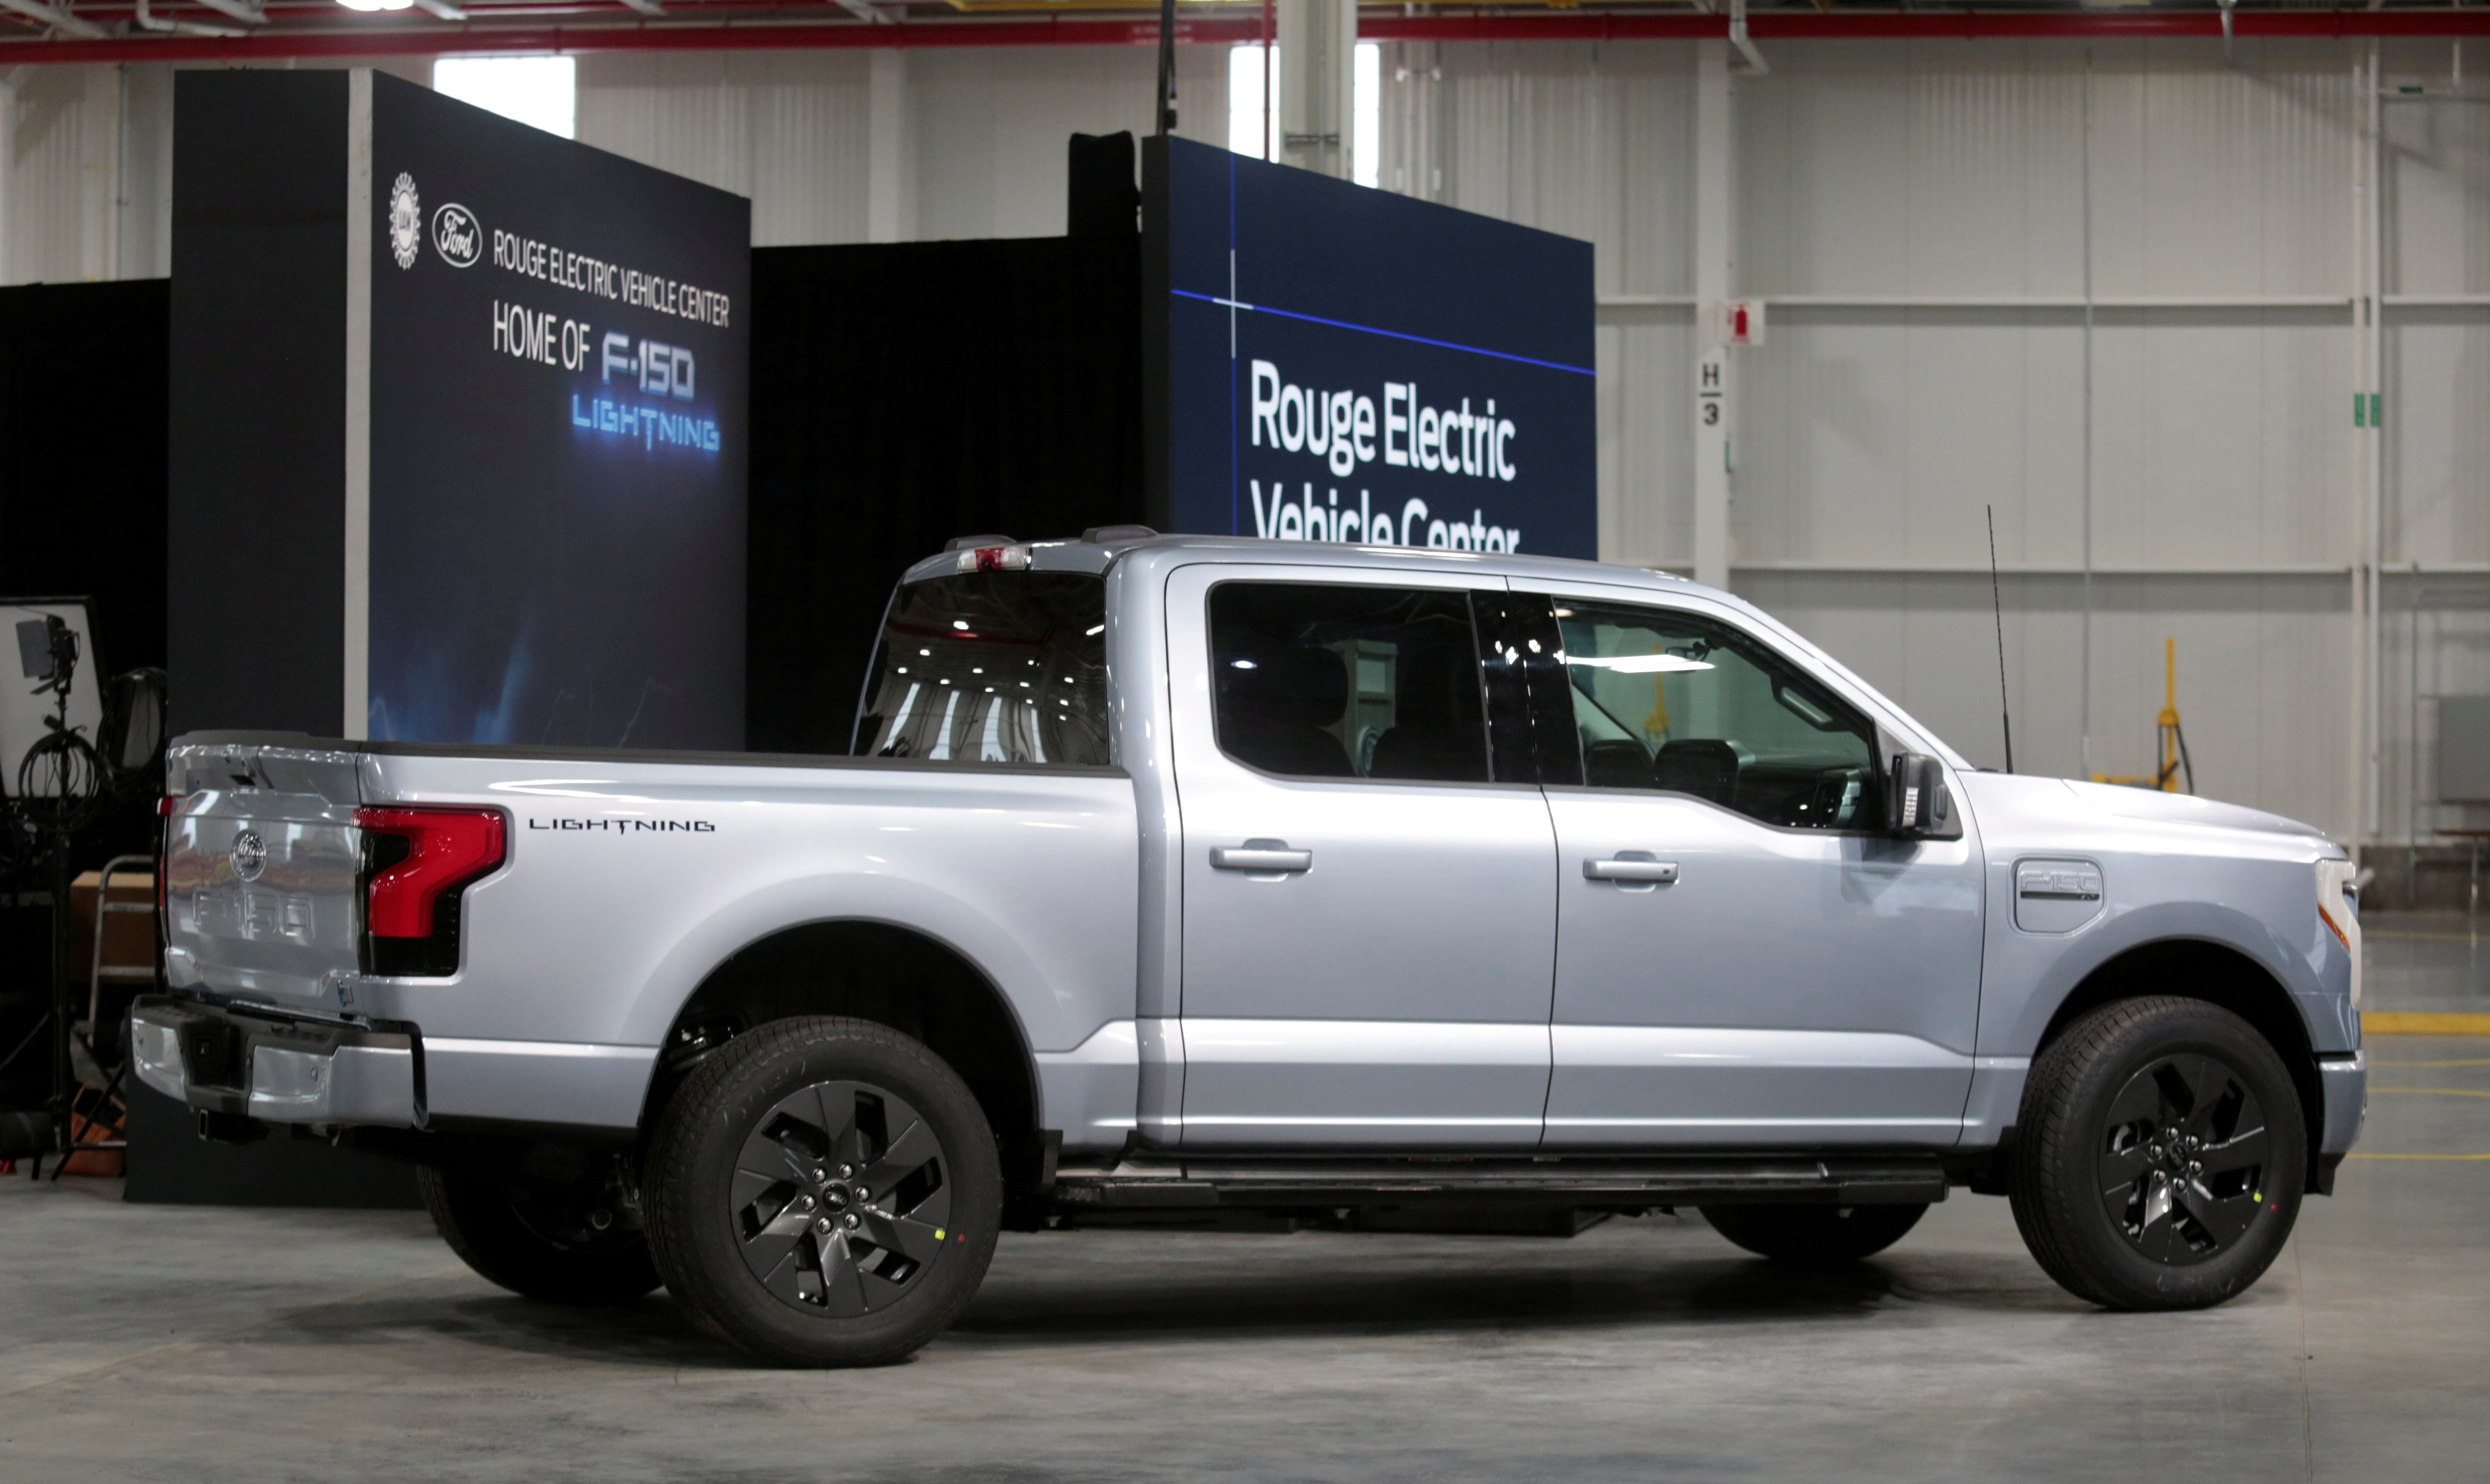 A Ford all-electric F-150 Lightning truck prototype is seen at the Rouge Electric Vehicle Center in Dearborn, Michigan, U.S. September 16, 2021   REUTERS/Rebecca Cook/File Photo